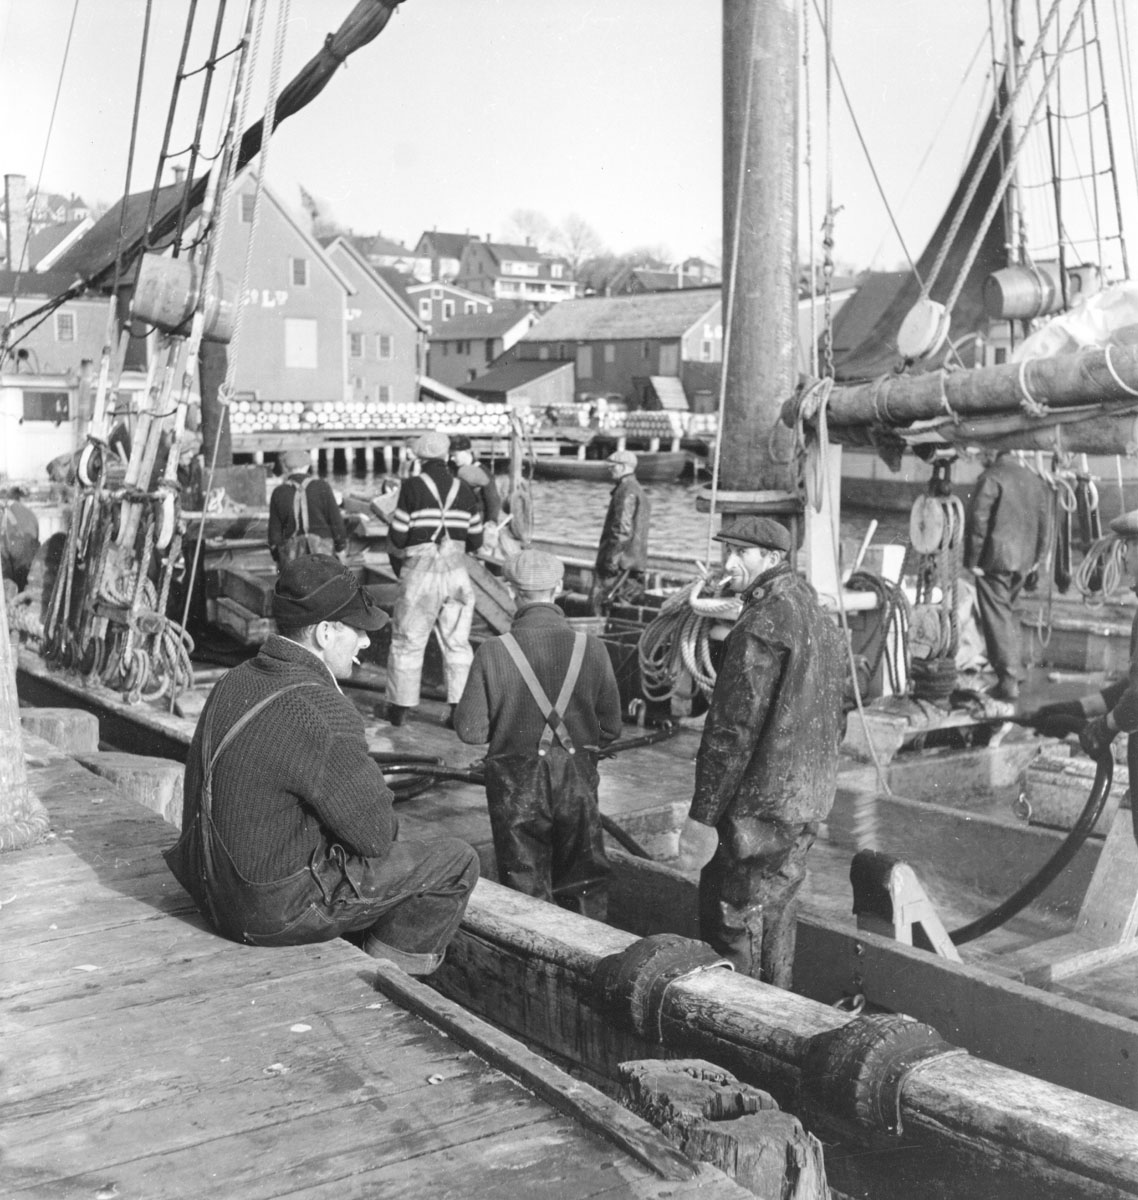 Men on deck at the wharf